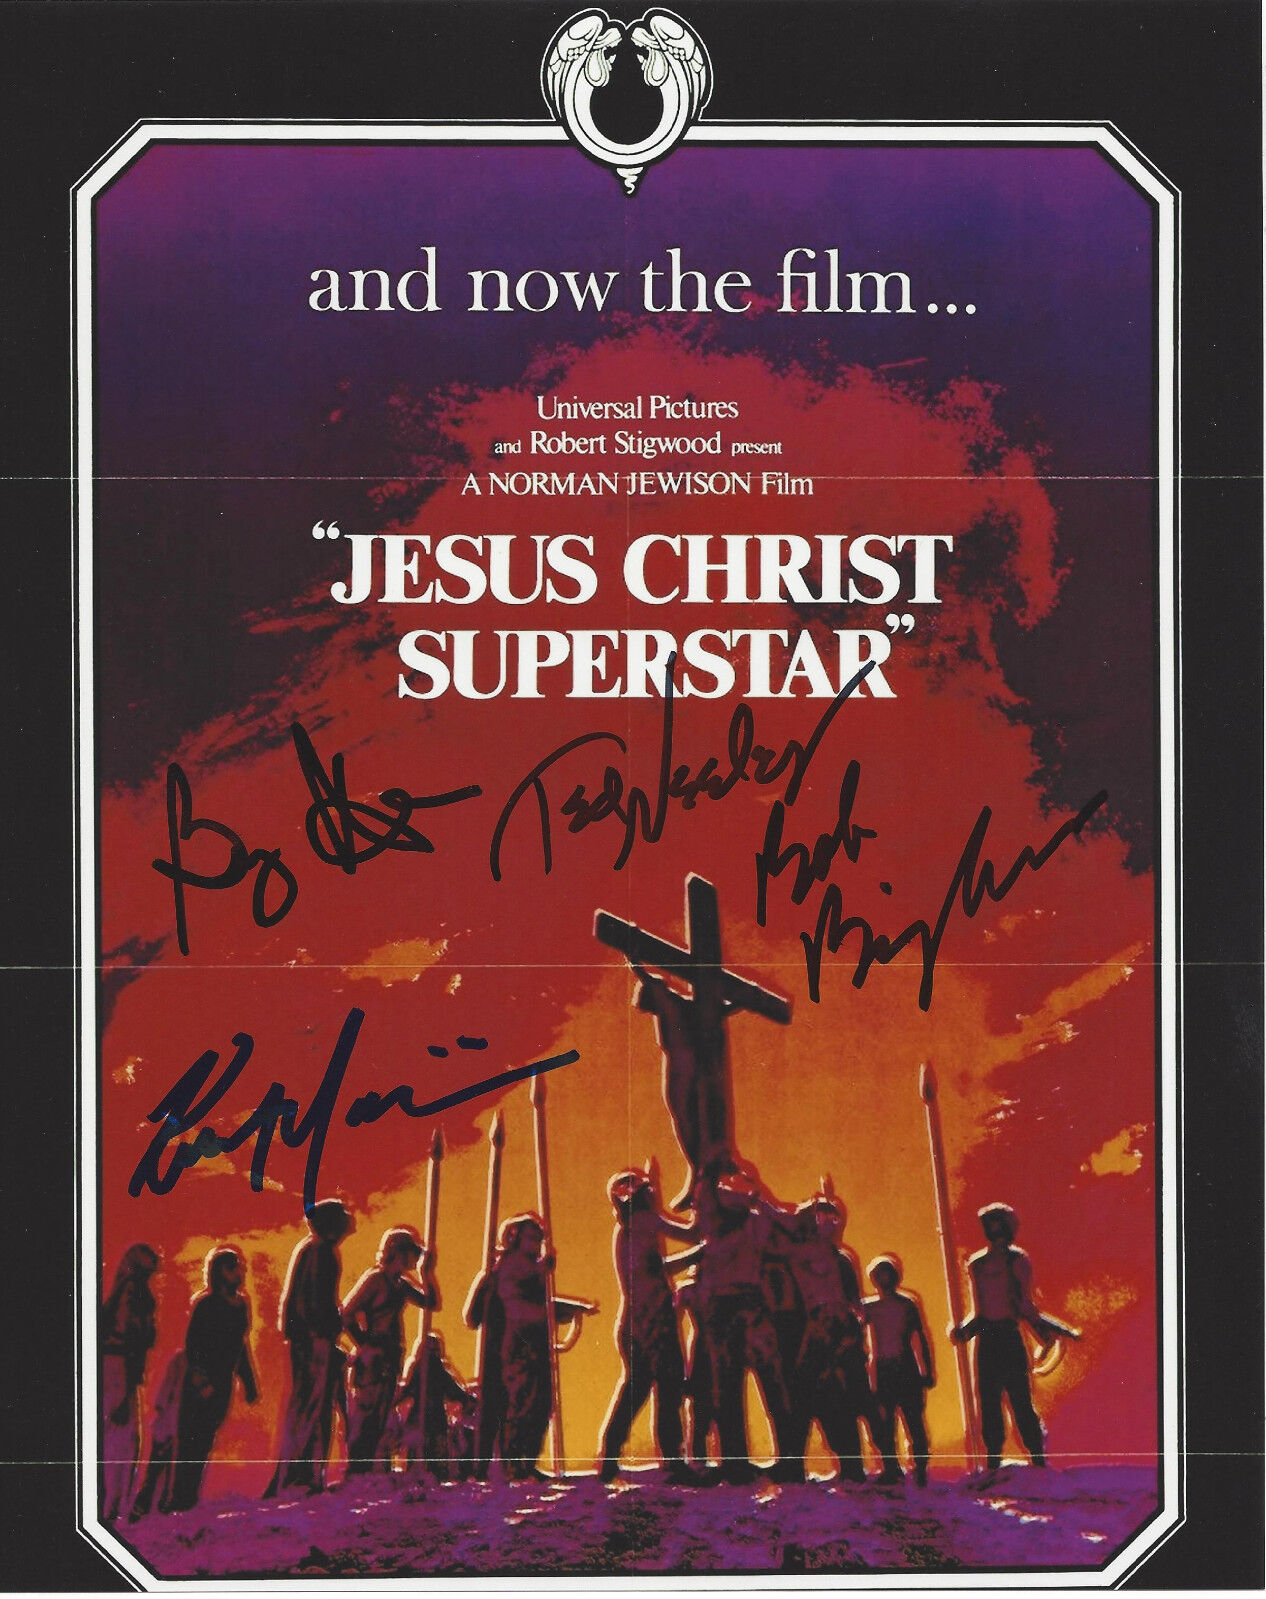 JESUS CHRIST SUPERSTAR CAST SIGNED 8X10 Photo Poster painting MOVIE POSTER w/COA X4 PROOF